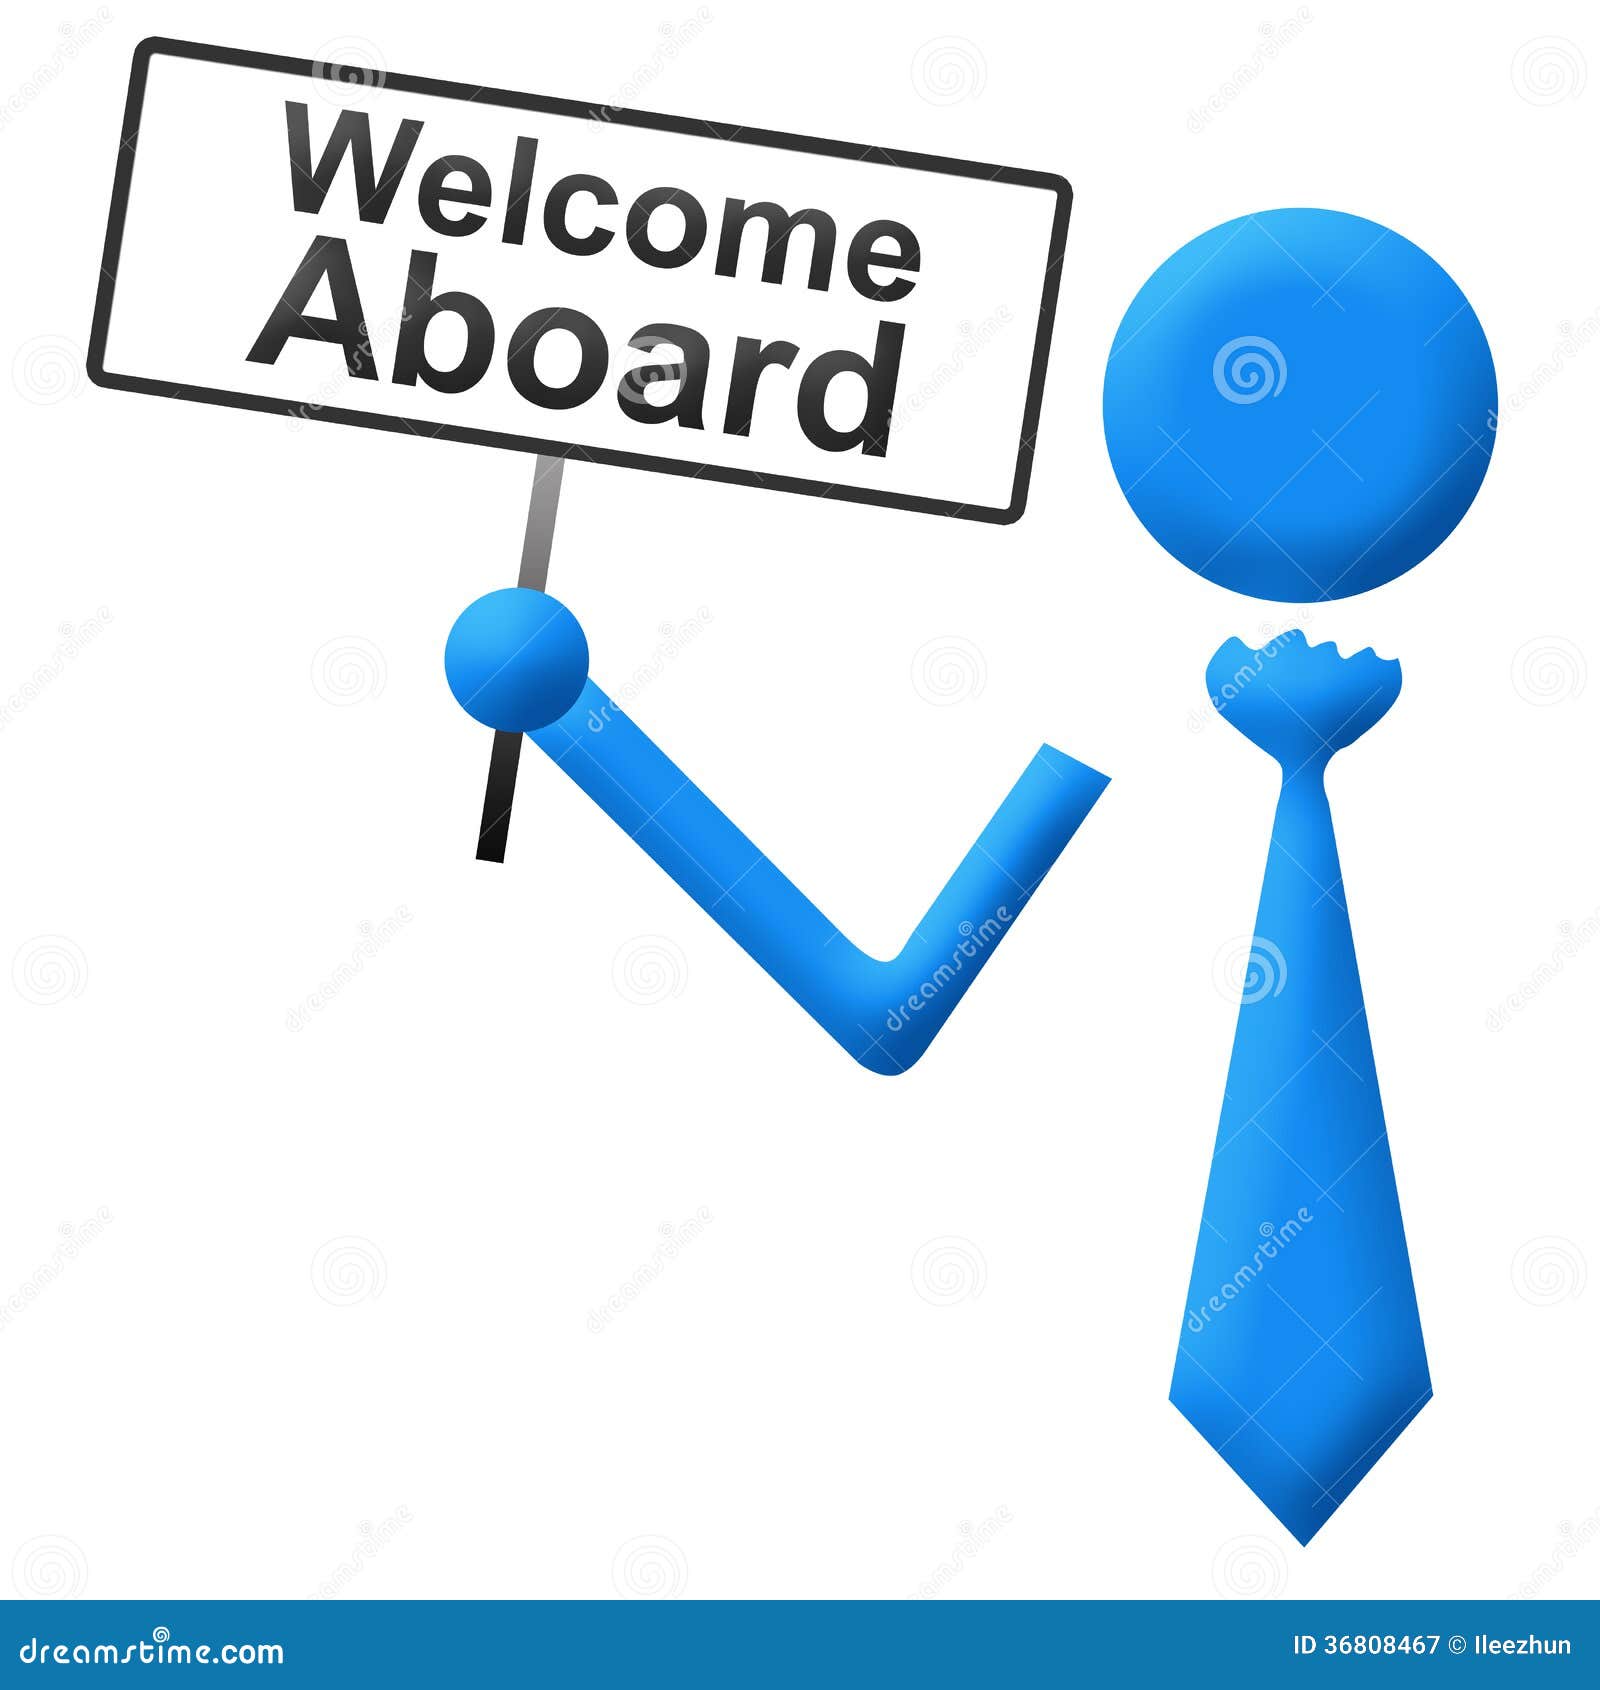 welcome-aboard-human-signboard-icon-tie-holding-sign-36808467.jpg